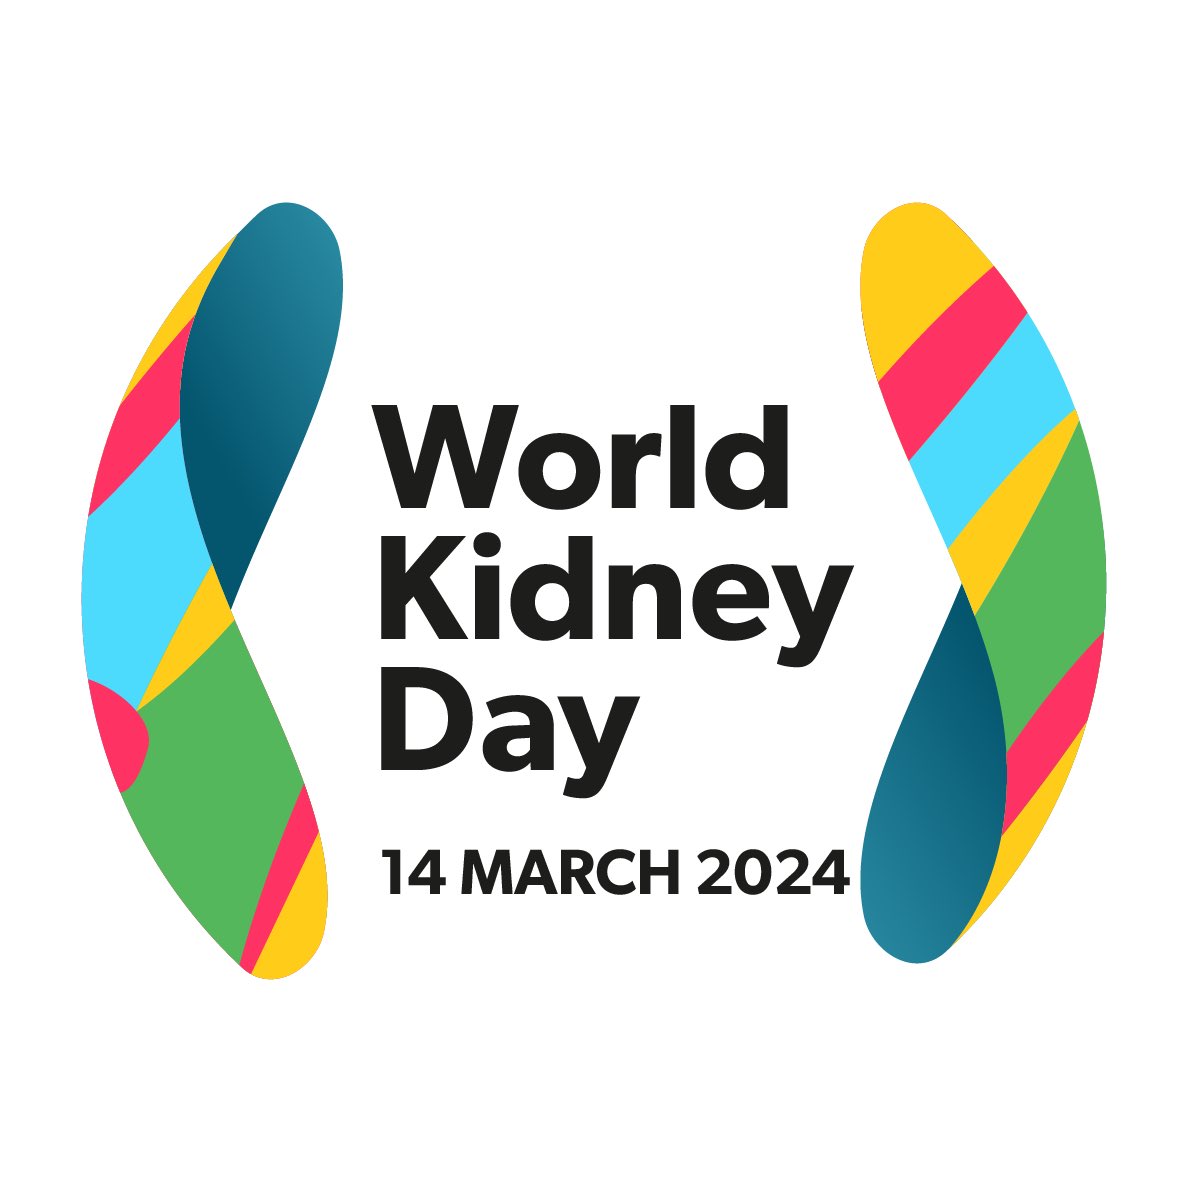 The CHCSA’s mission is aligned with this year’s #WorldKidneyDay #kidneyhealthforall - Kidney Health for All: Advancing equitable access to care and optimal medication practice. The CHCSA commits to promote kidney health in youth. @worldkidneyday